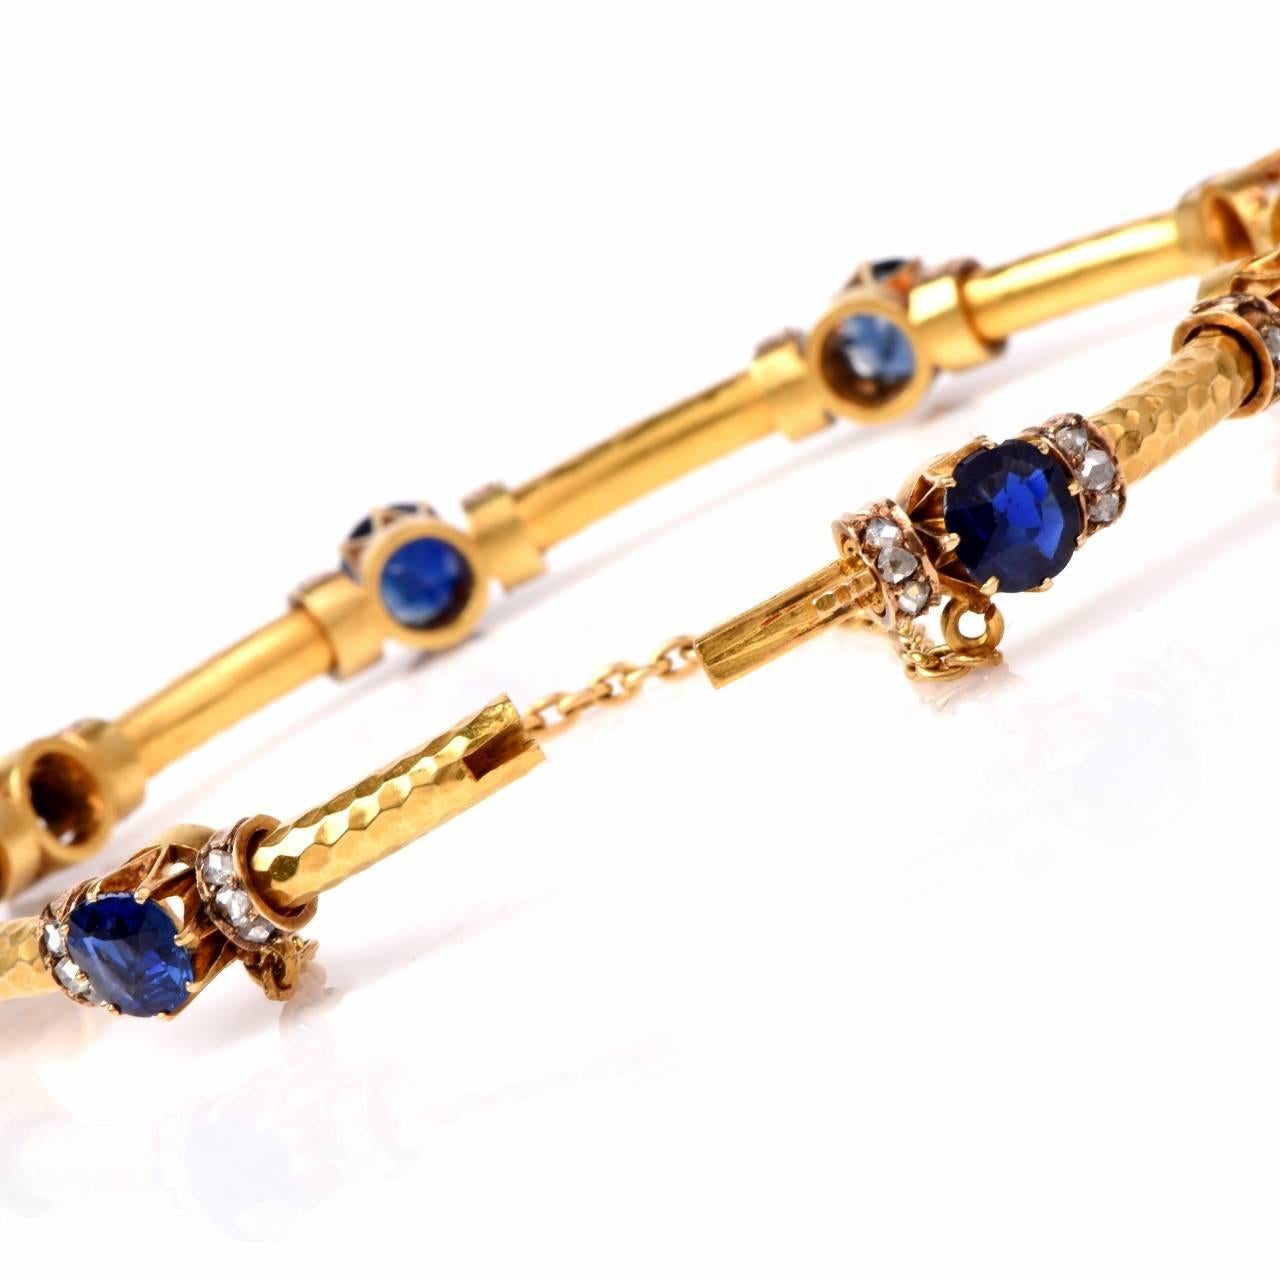 This exquisite antique Victorian bracelet is crafted in solid 18K yellow gold and features a total of 8 genuine oval & cushion cut natural corumdum sapphires (no indication of heat treatment according to prestige report from AGL) approx:11.55 cttw